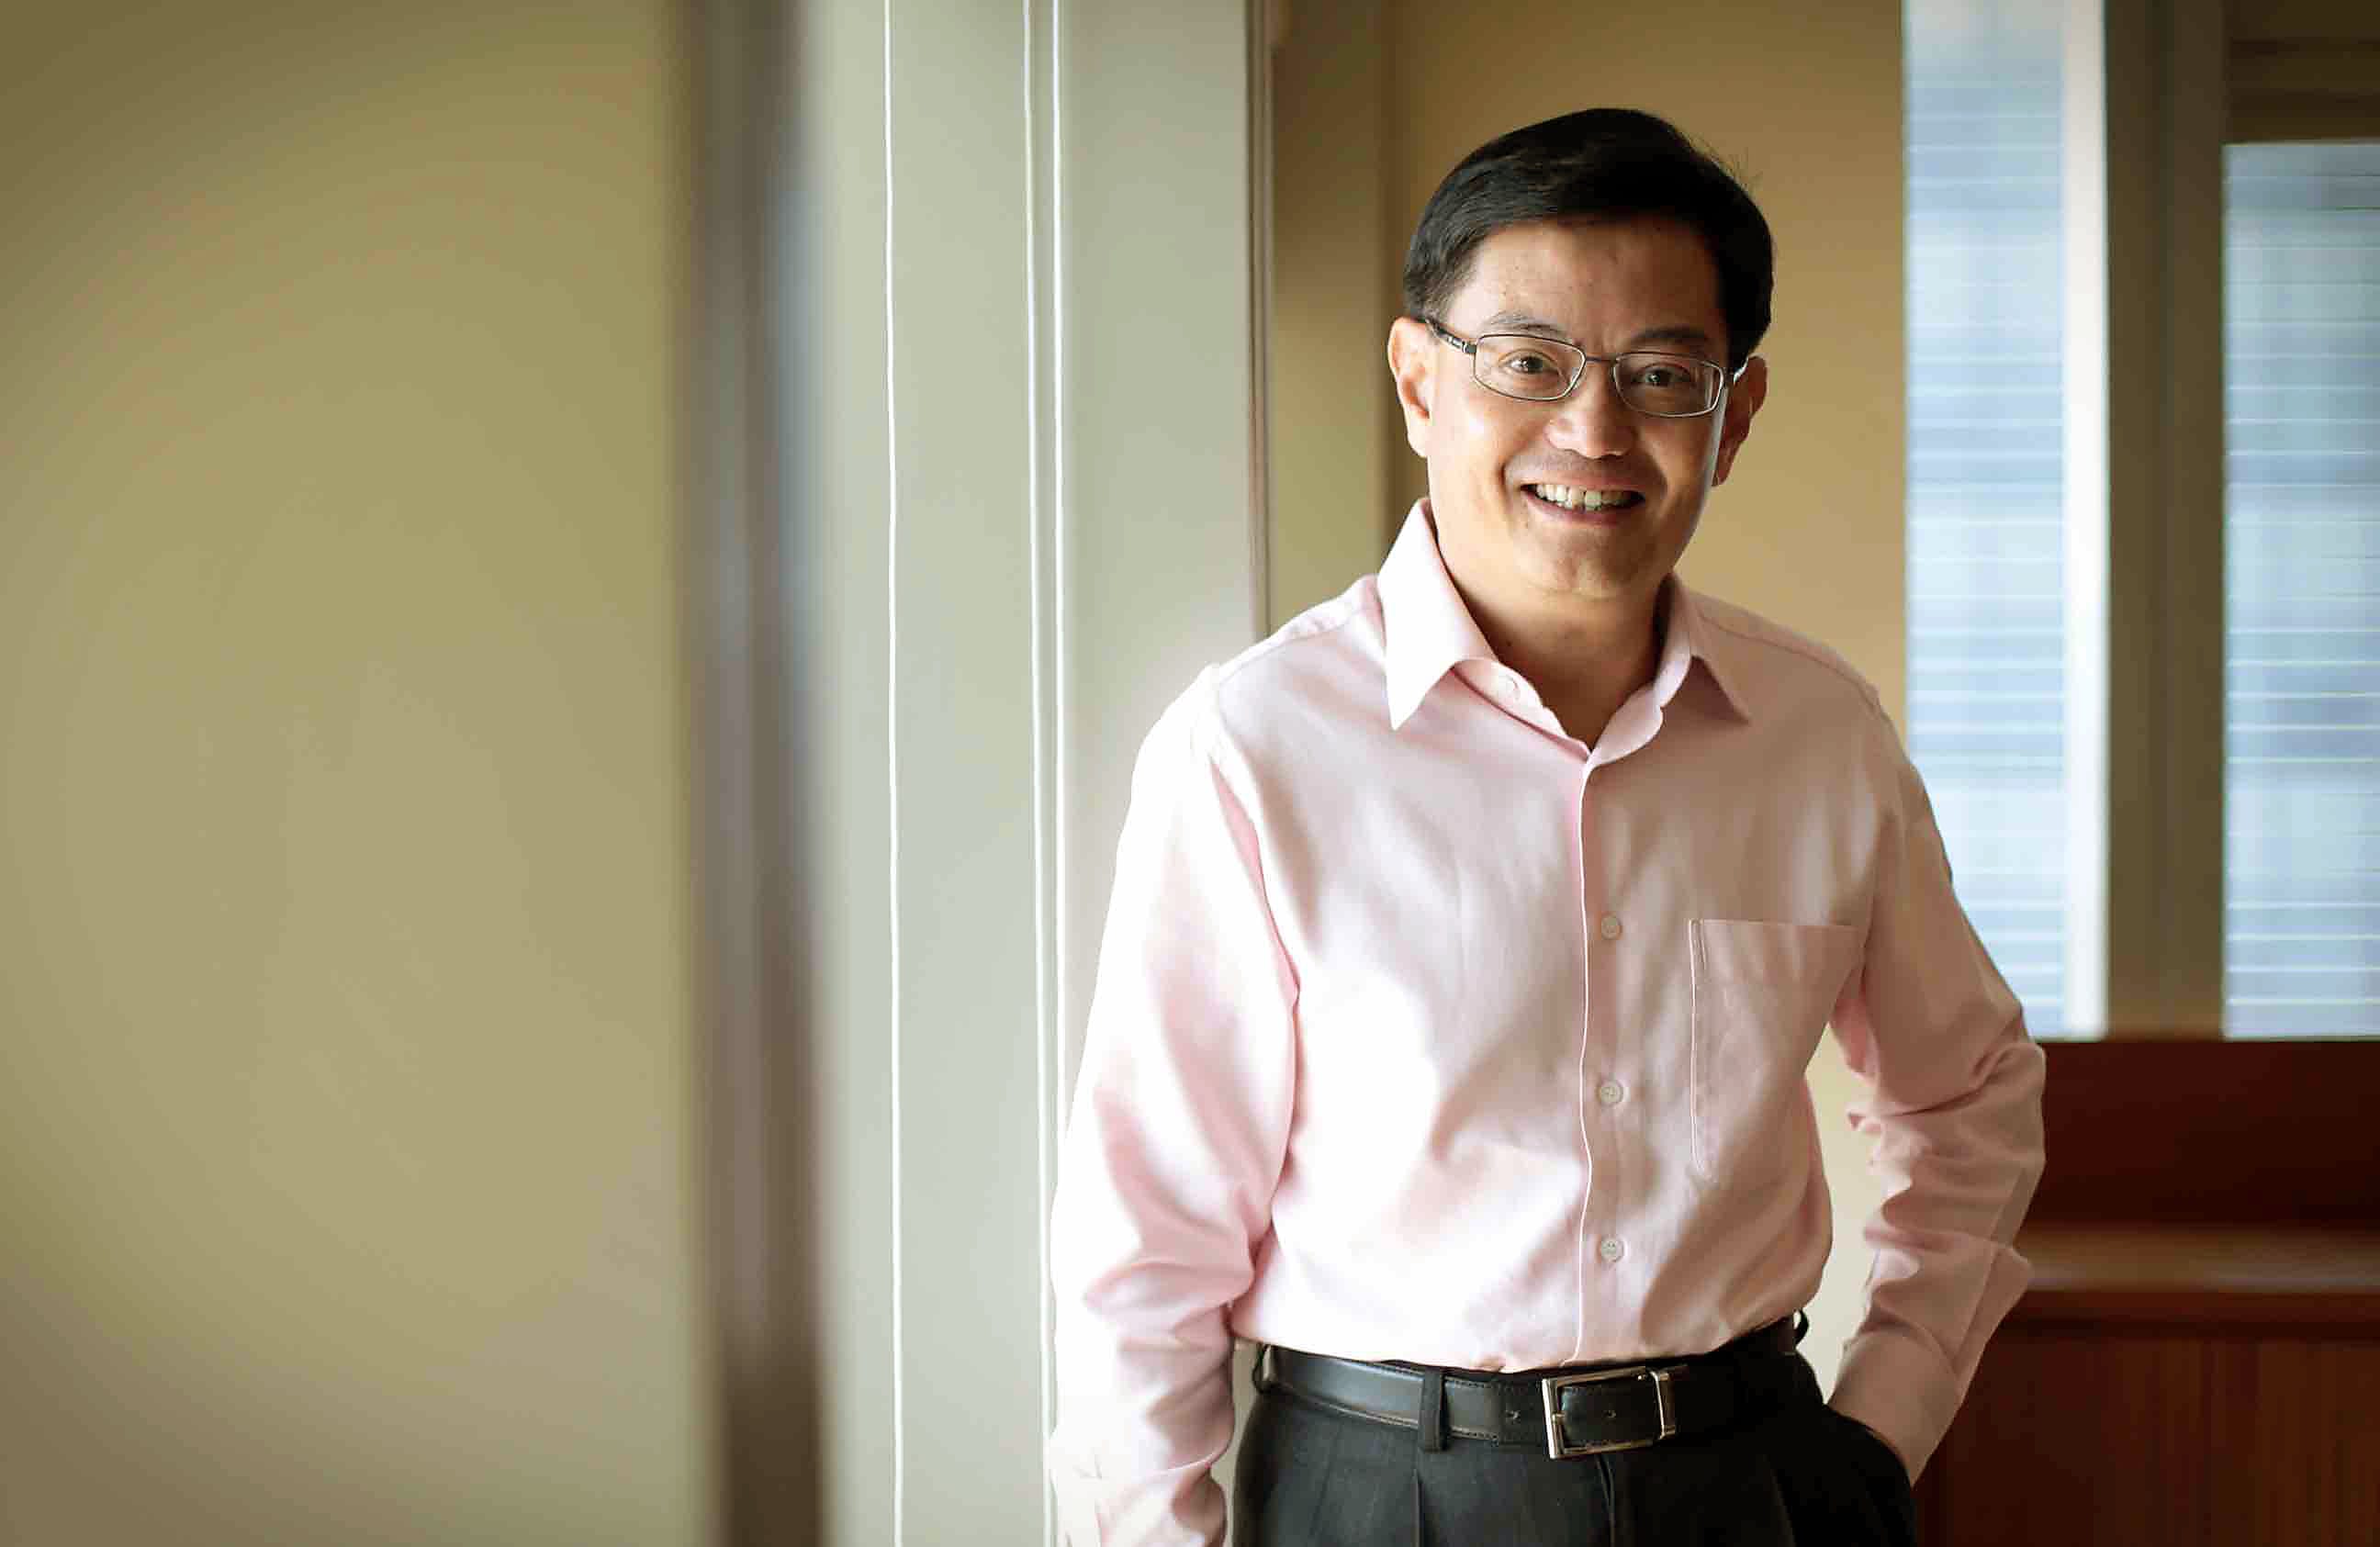 Deputy Prime Minister Heng Swee Keat (pictured) was slated to jointly open the Point Zero Forum, which is to be held from June 21 to 23, 2022 in Zurich, with Mr Ueli Maurer, Switzerland's federal councillor and head of the federal department of finance.